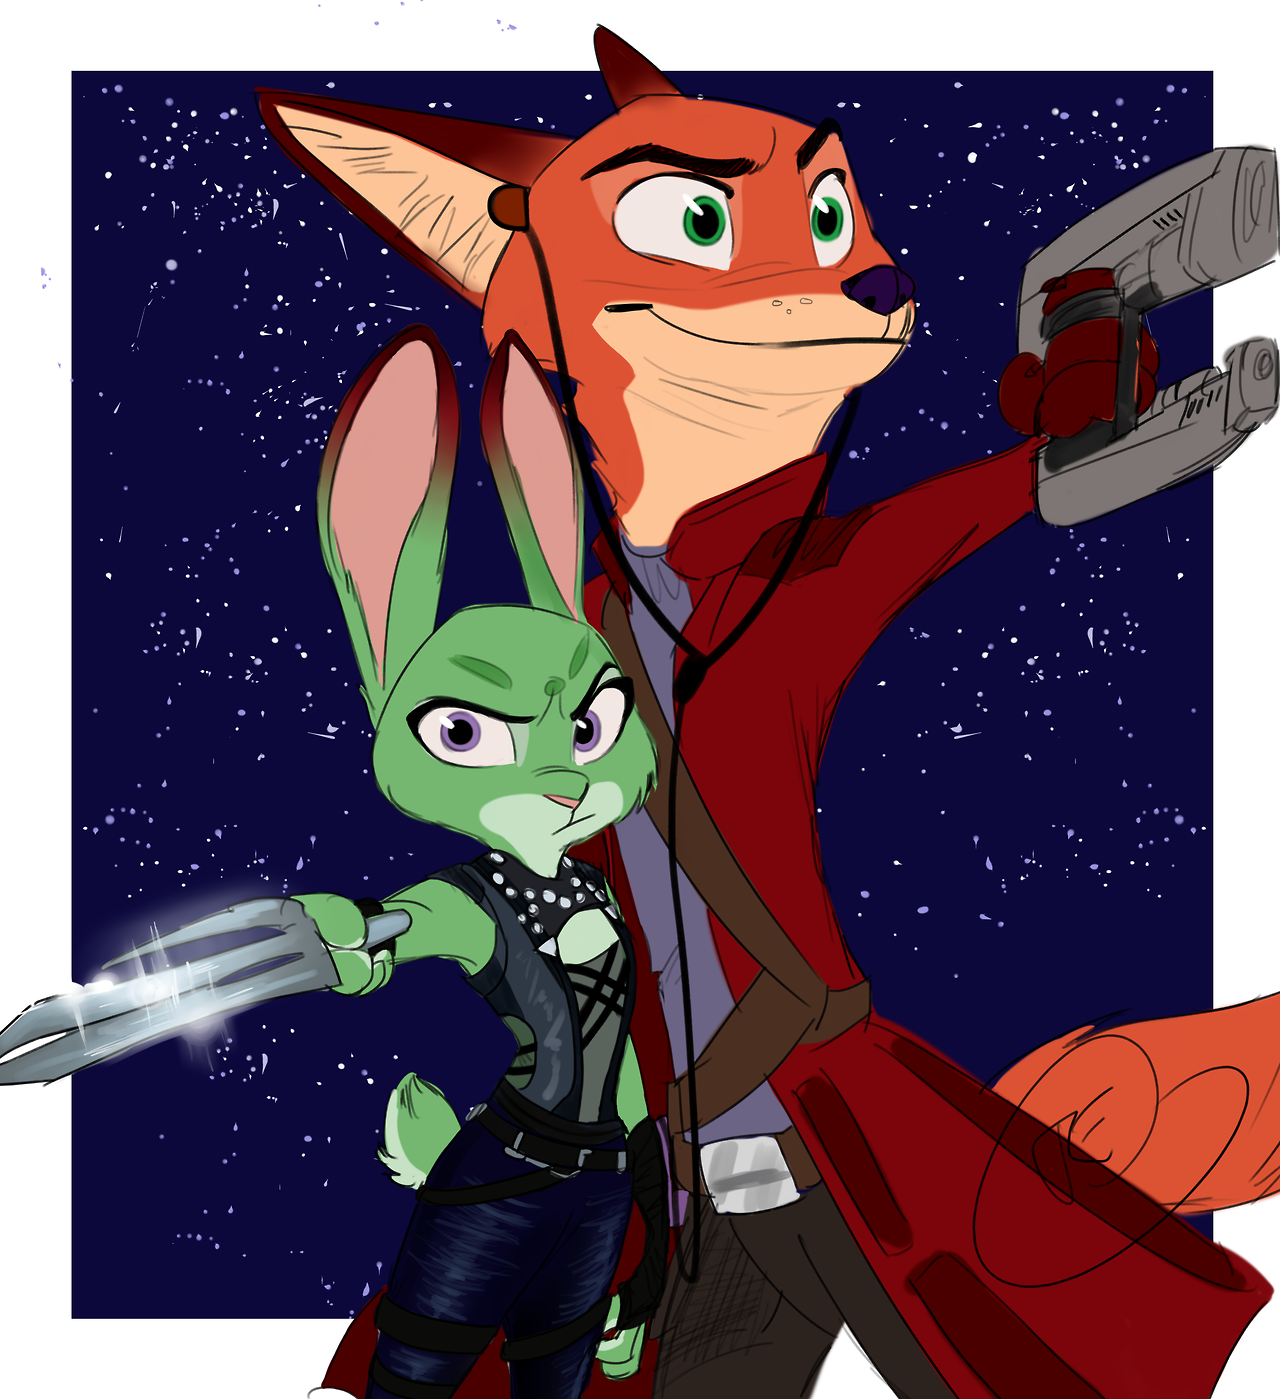 Furry guardians of the galaxy - Gamora, Guardians of the Galaxy, Art, Zootopia, Nick and Judy, Star lord, Crossover